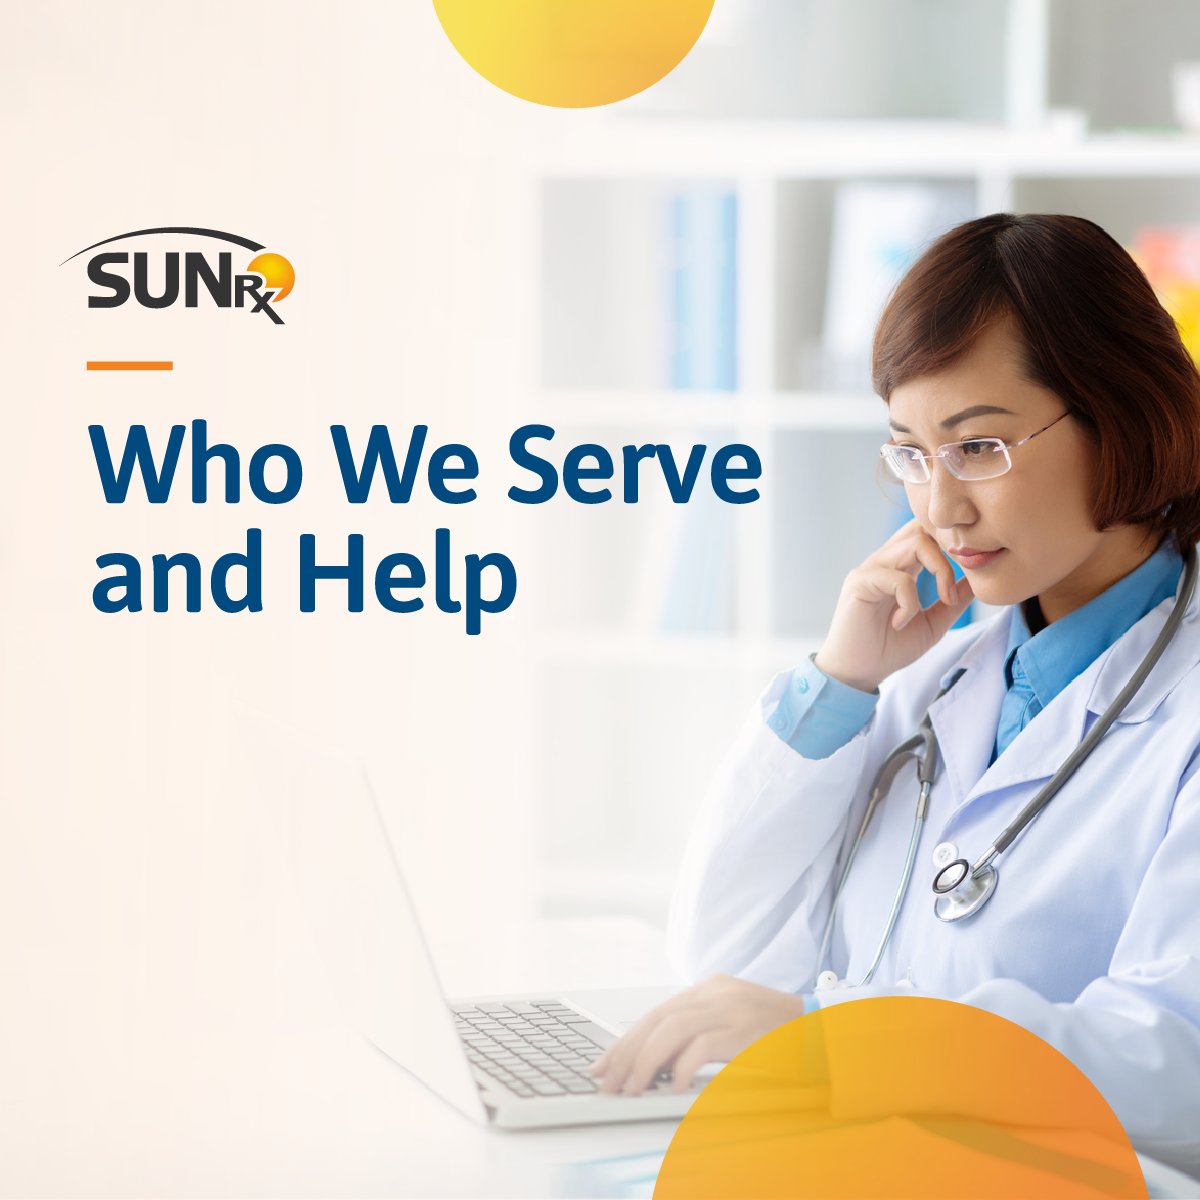 We can help! Find out why Community Health Centers are choosing SUNRx. sunrx.com/who-we-serve 

#340BPorgram #whoweserve #trustedpartner